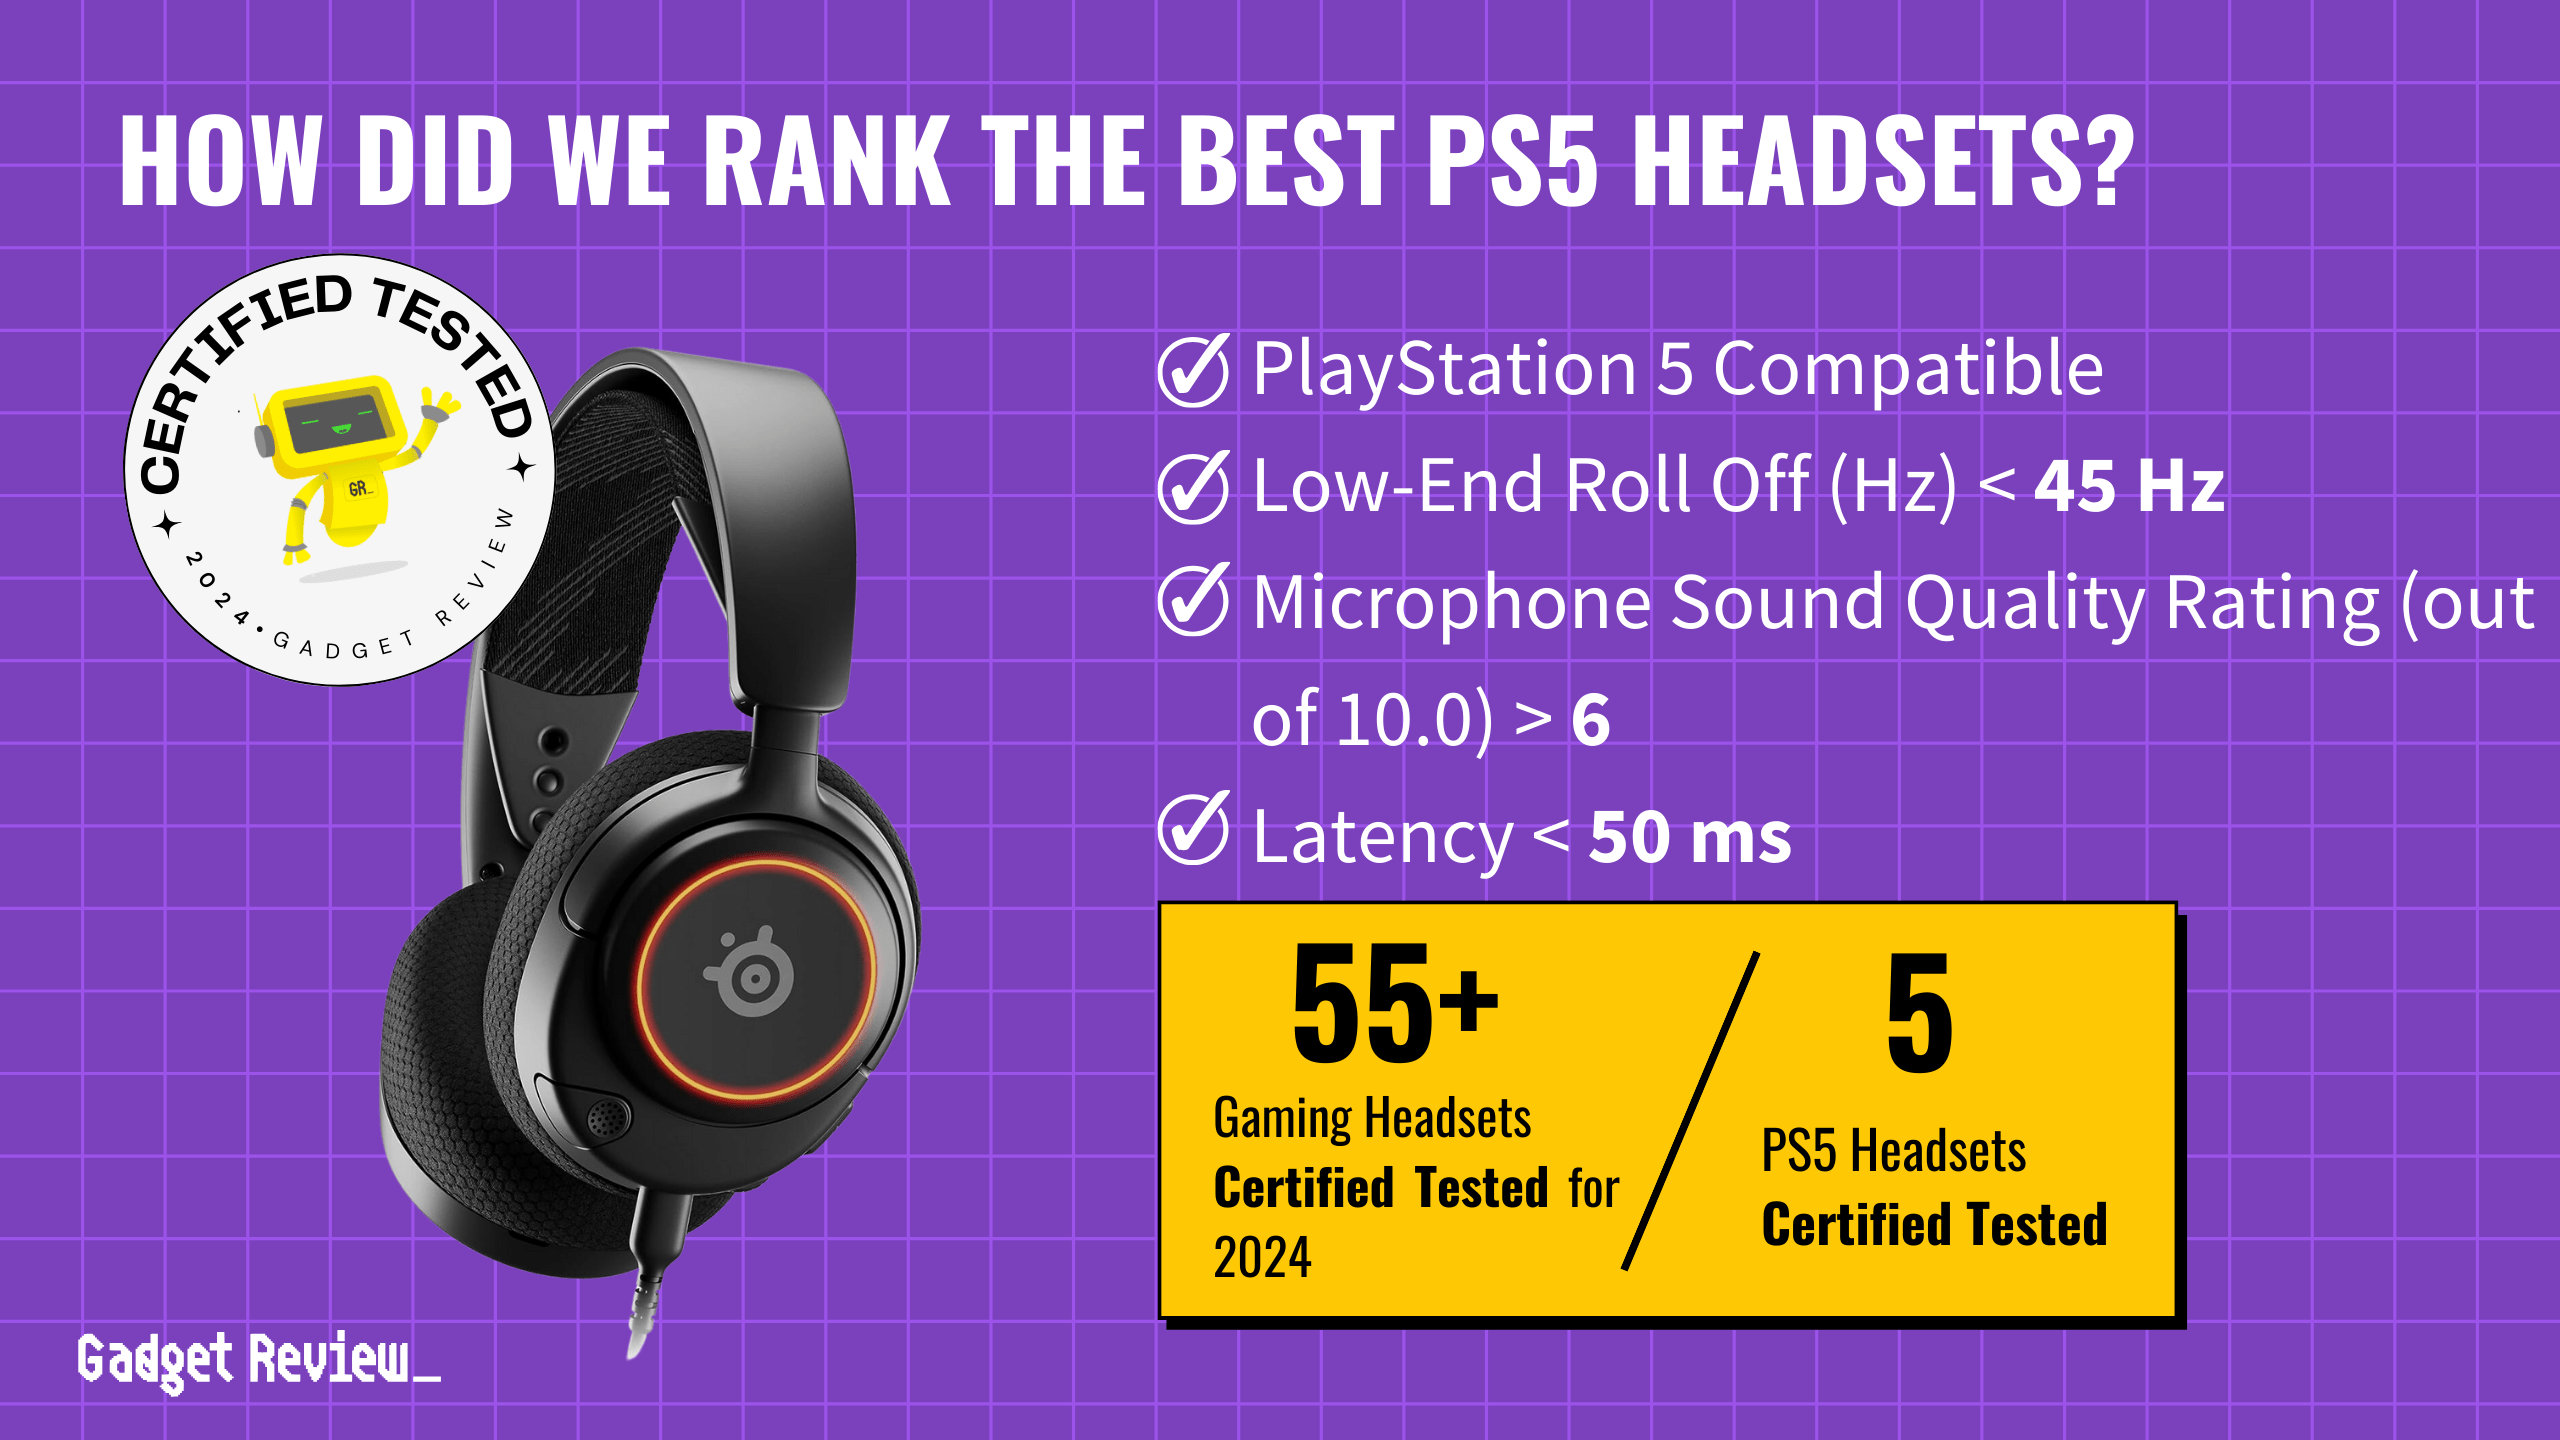 What’s the Best PS5 Headset? 5 Options Ranked